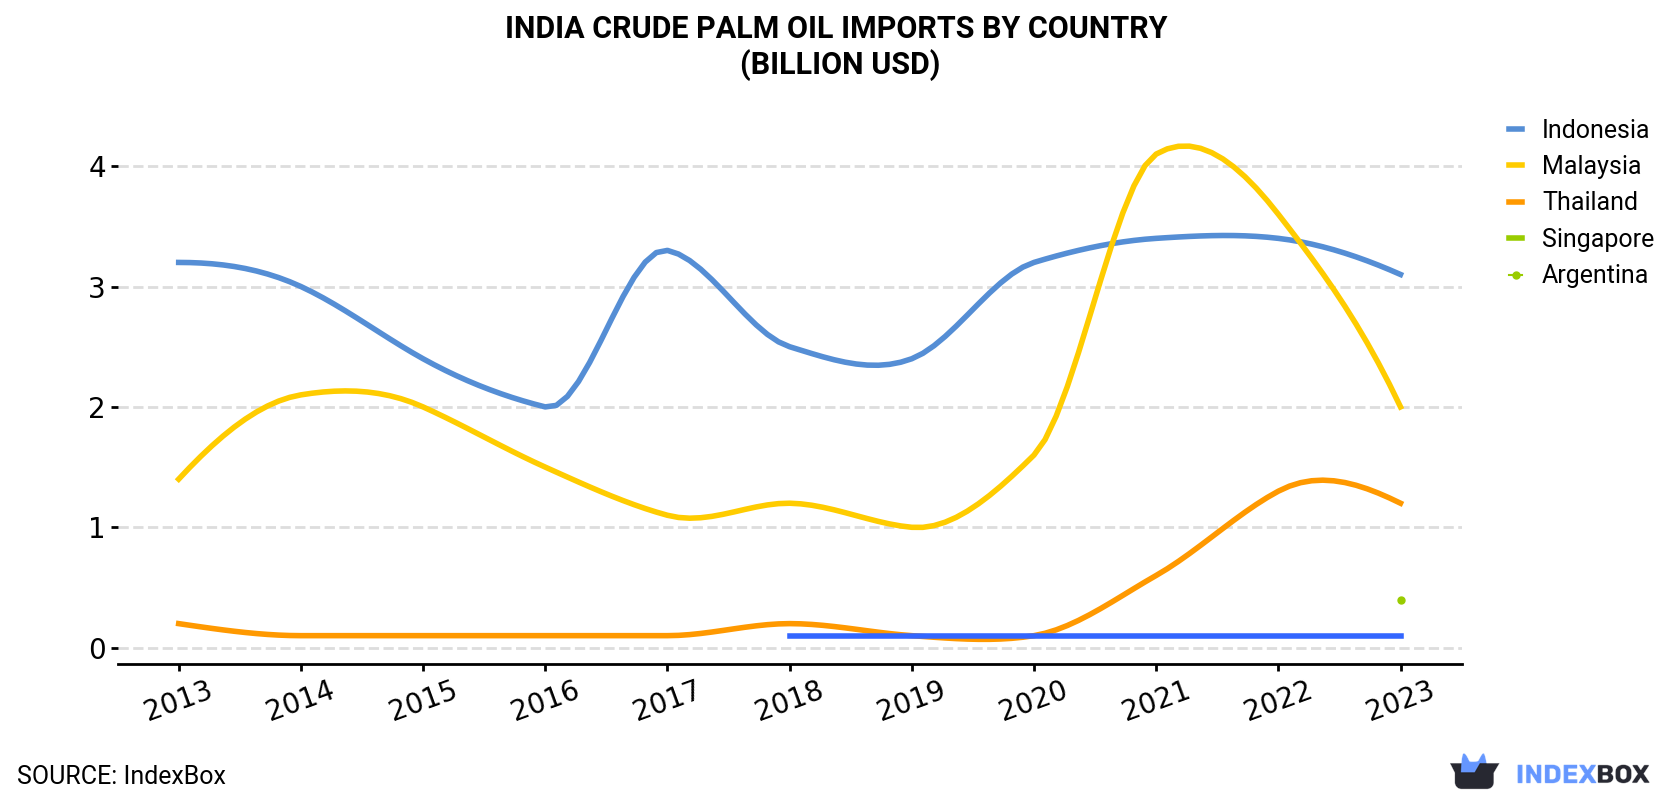 India Crude Palm Oil Imports By Country (Billion USD)